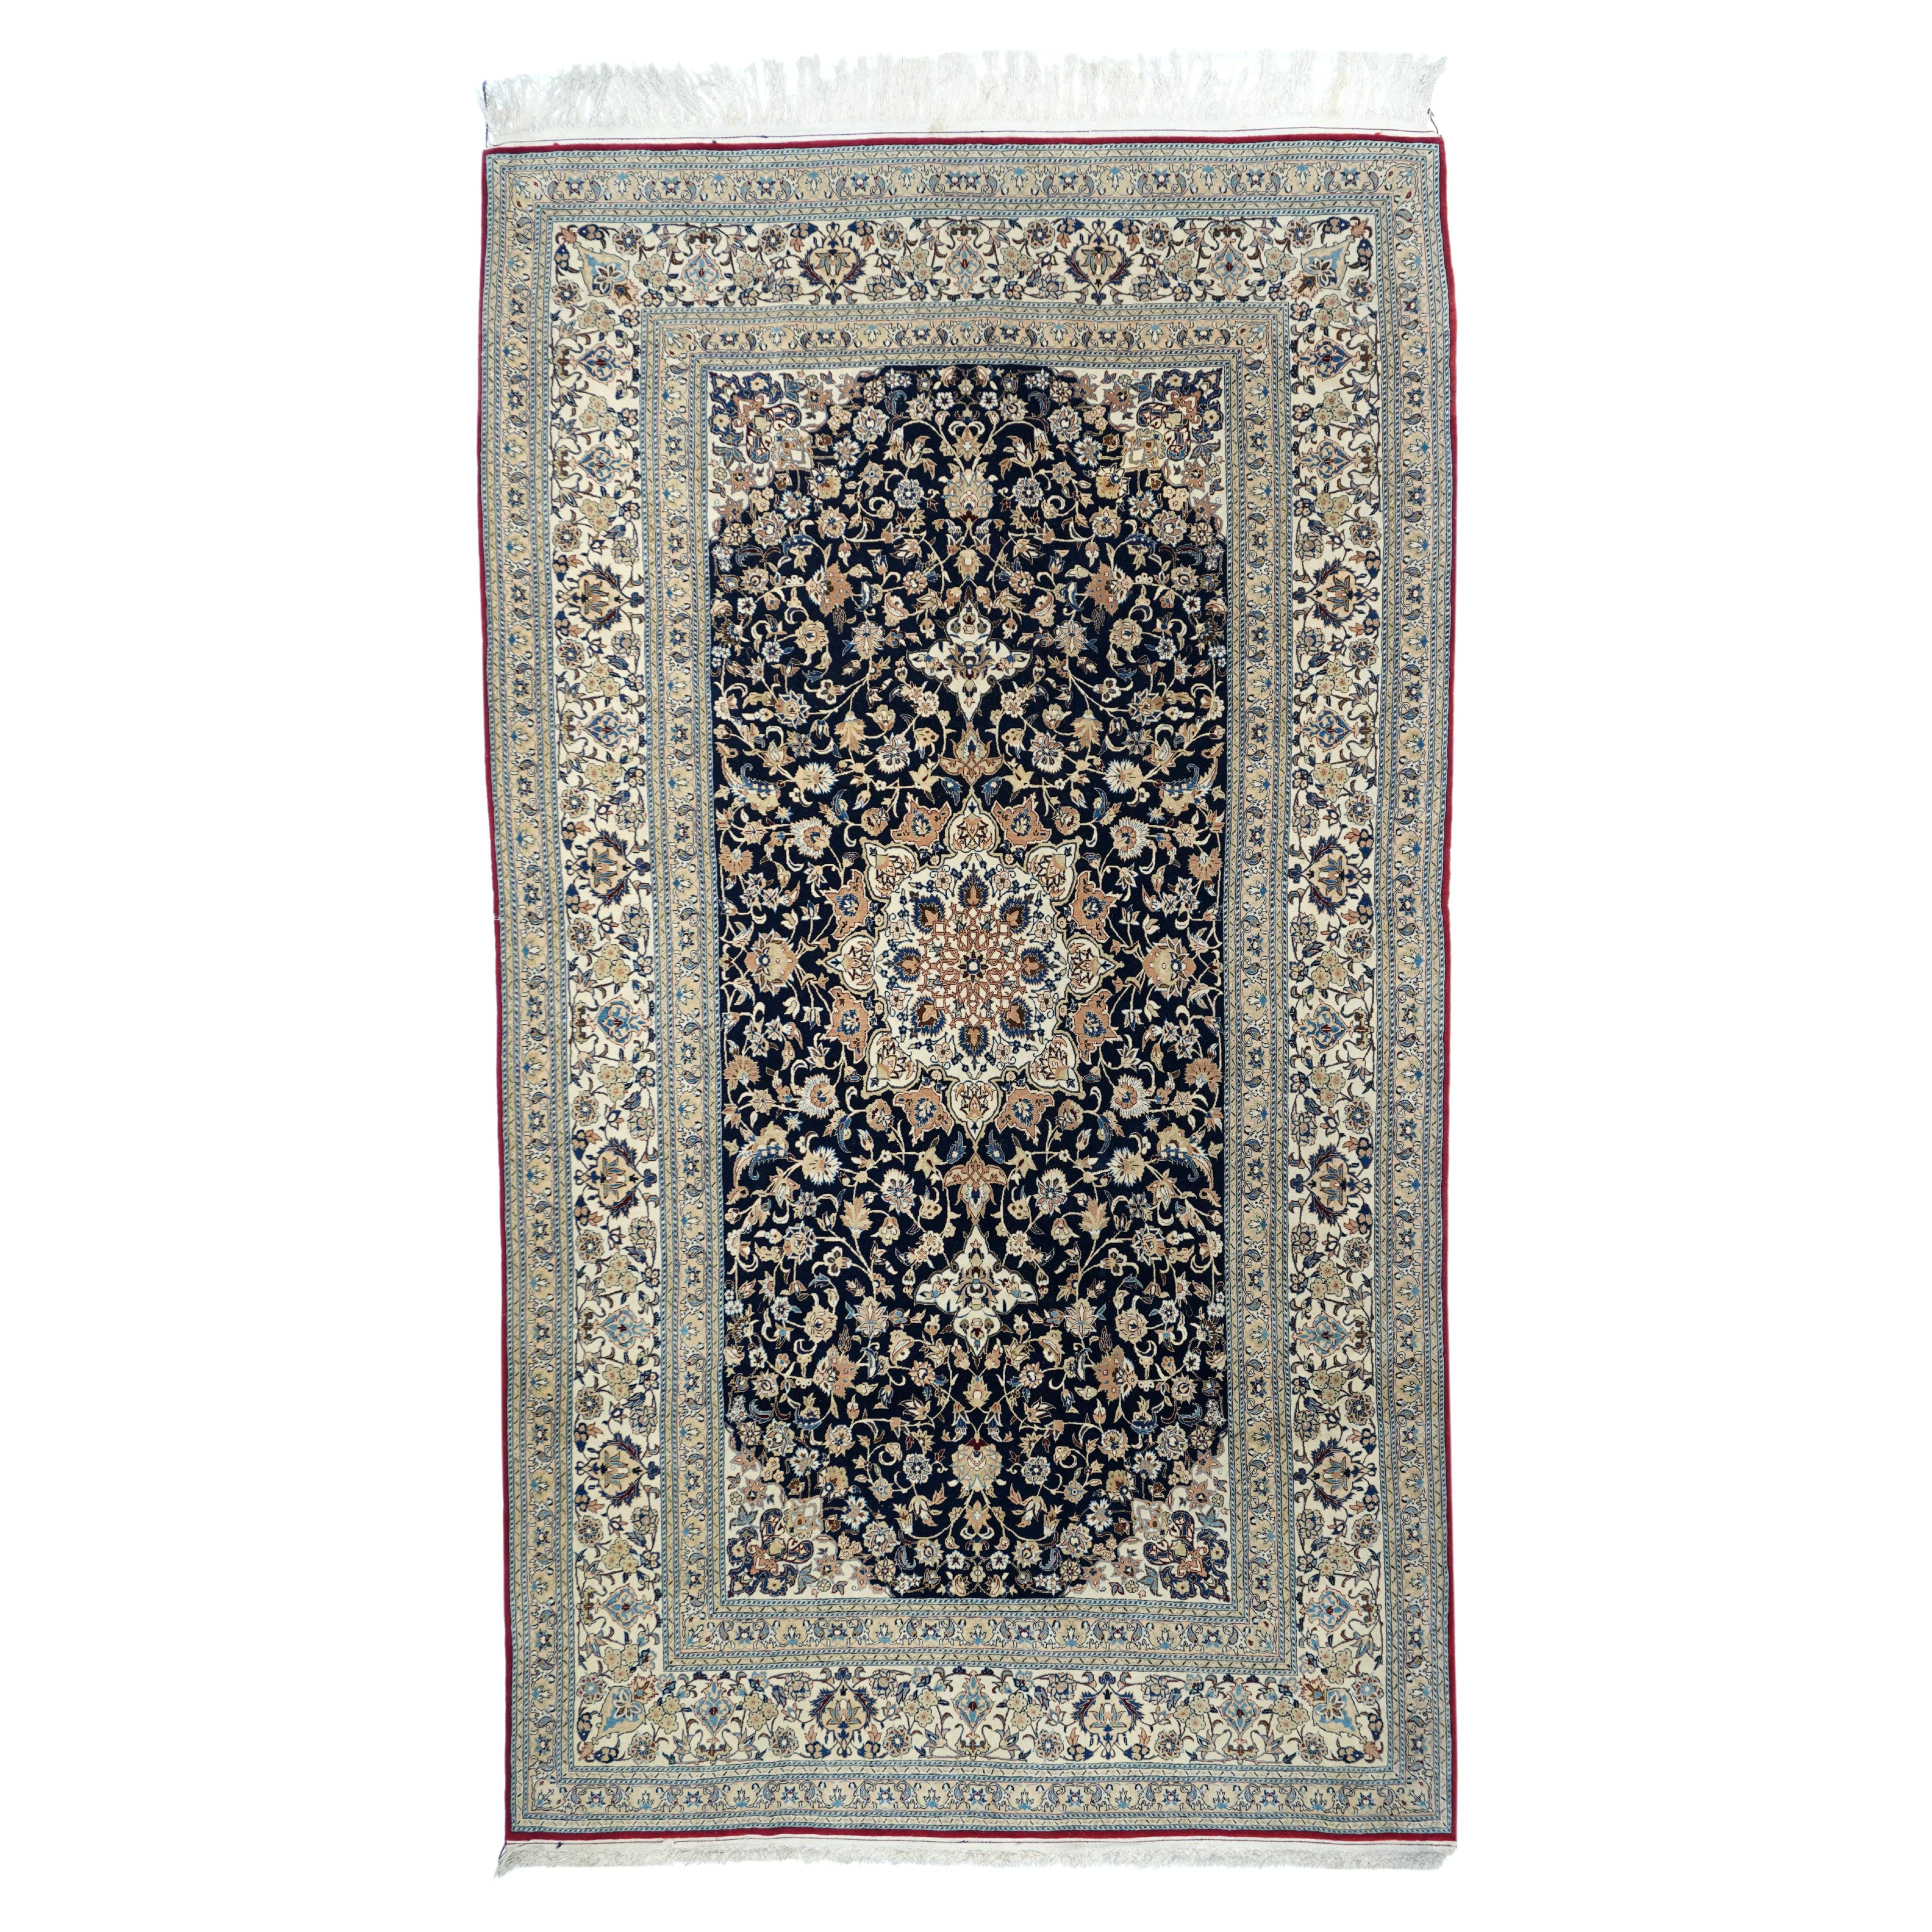 Extremely Fine Persian Habibian Wool and Silk (One of Pair) Rug 5'4'' x 9'6''